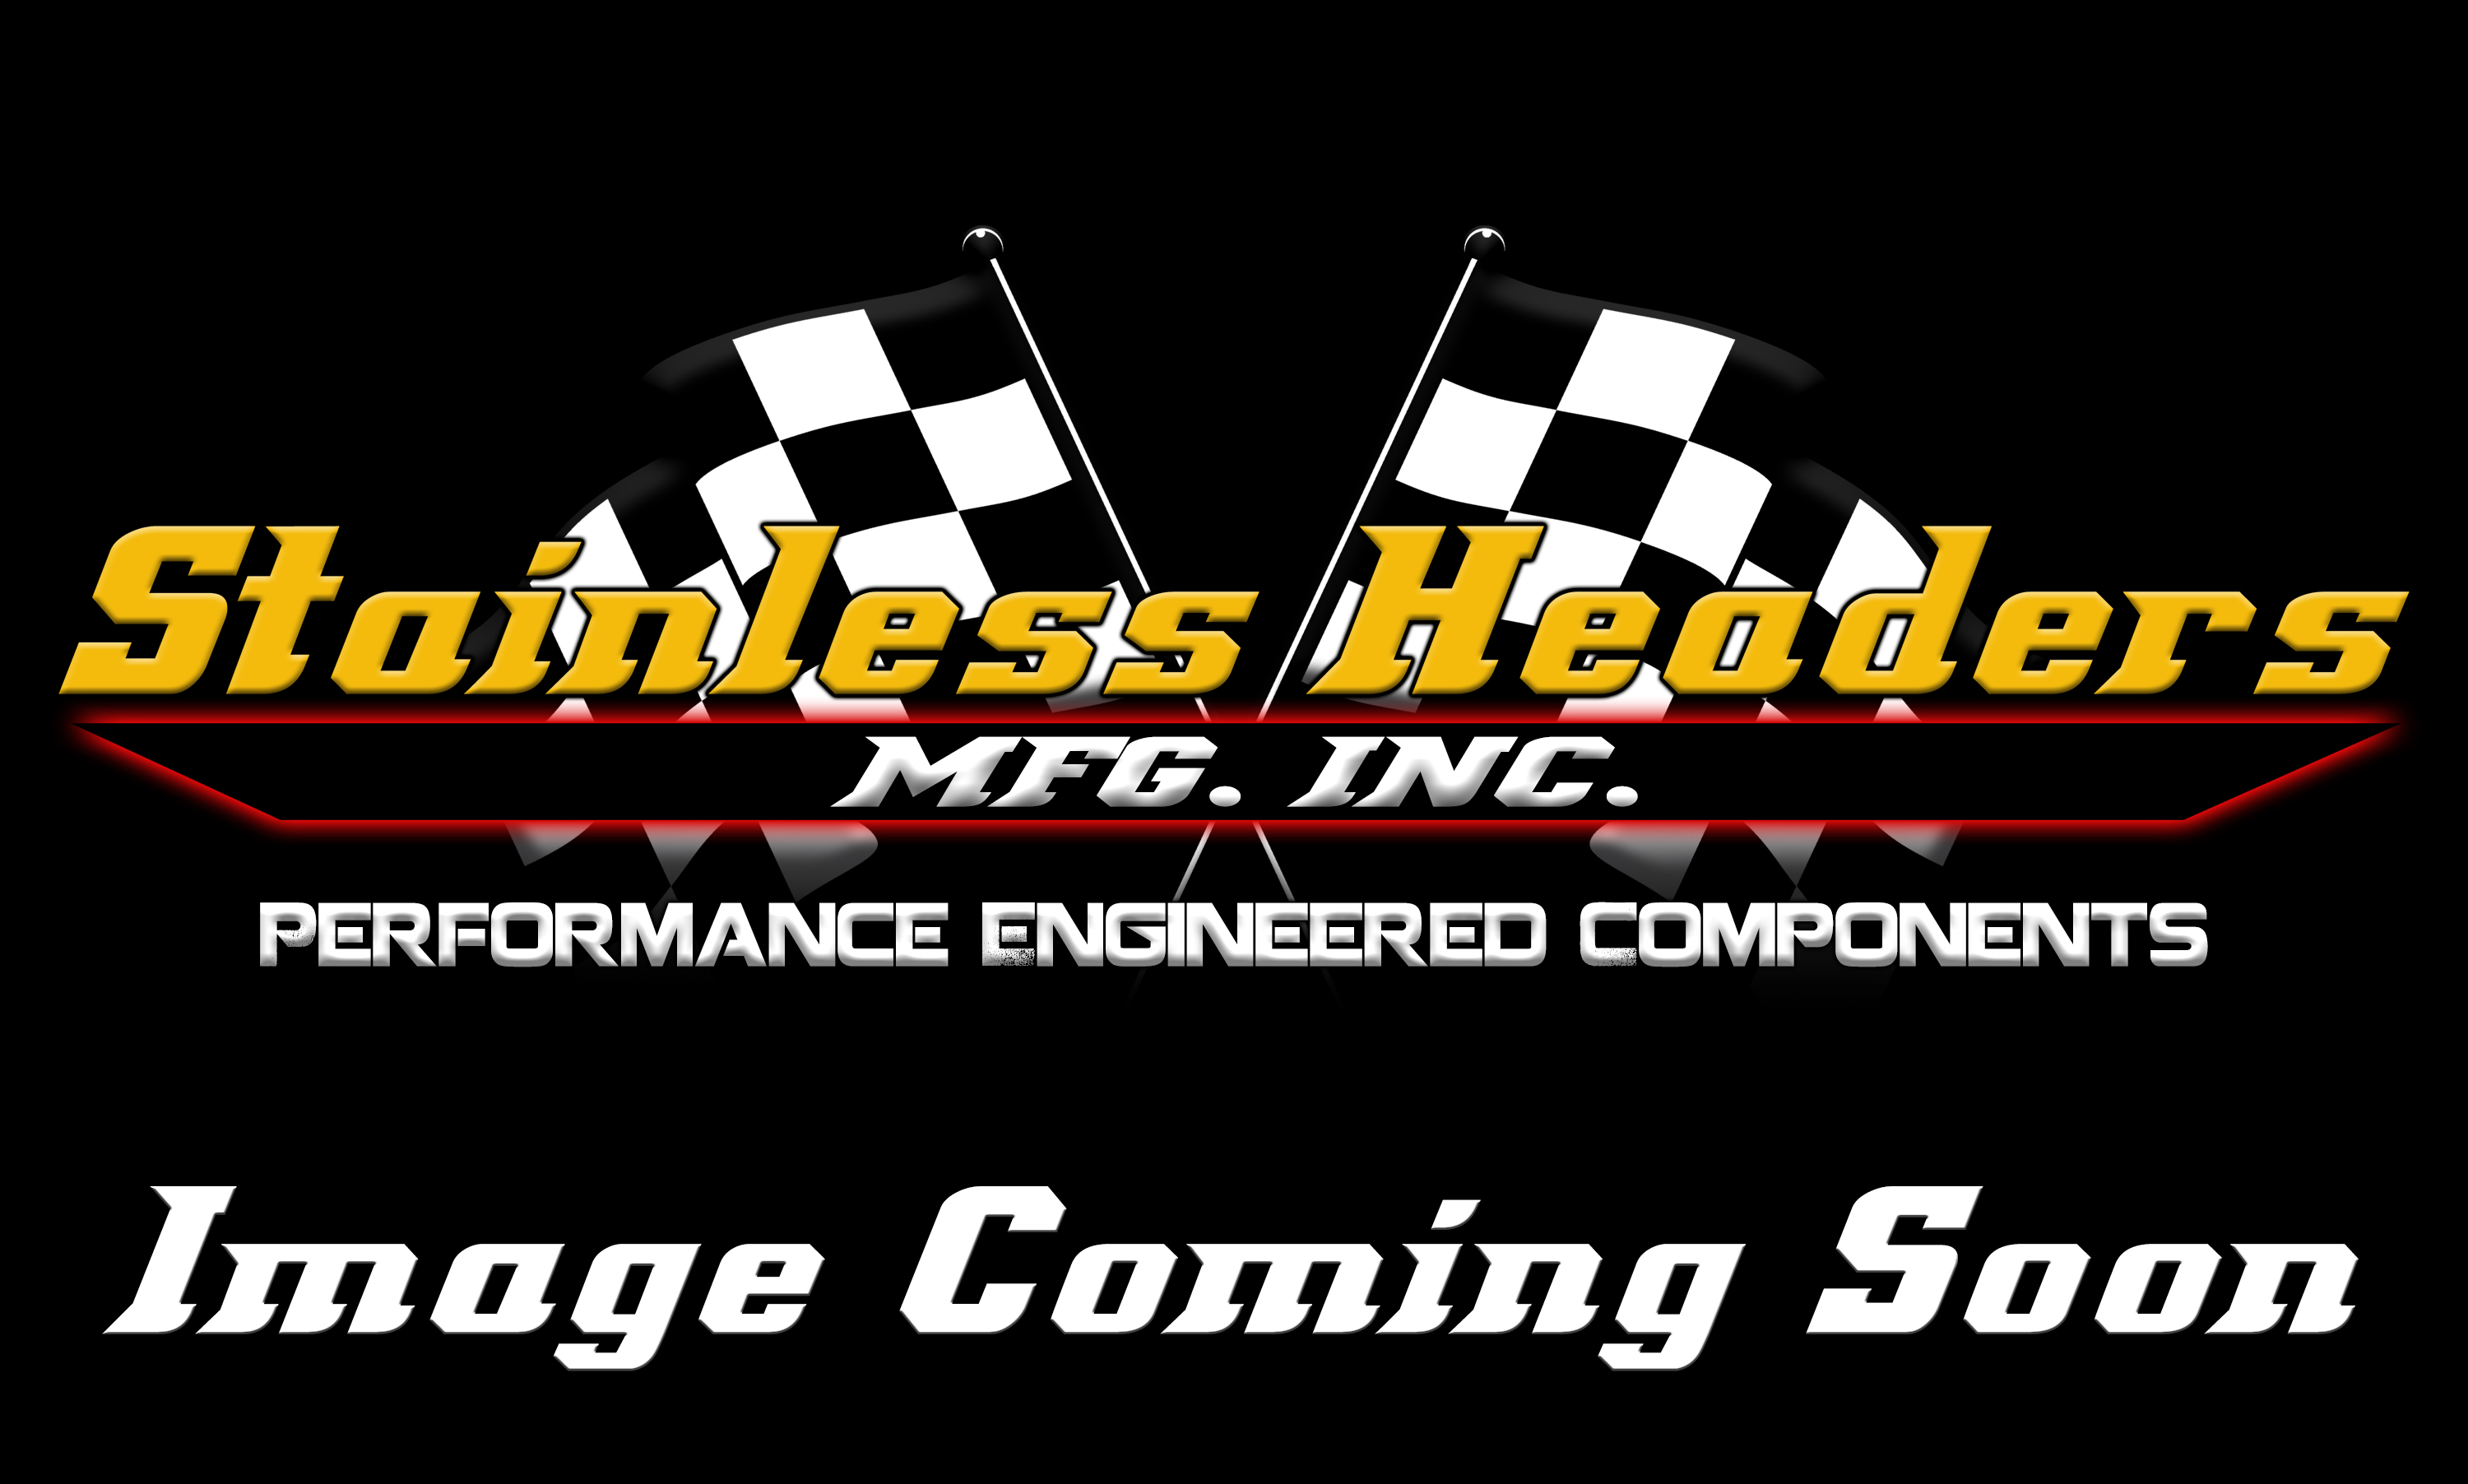 Stainless Headers - 1 1/2" Primary 6 into 1 Performance Merge Collector-16ga 304ss